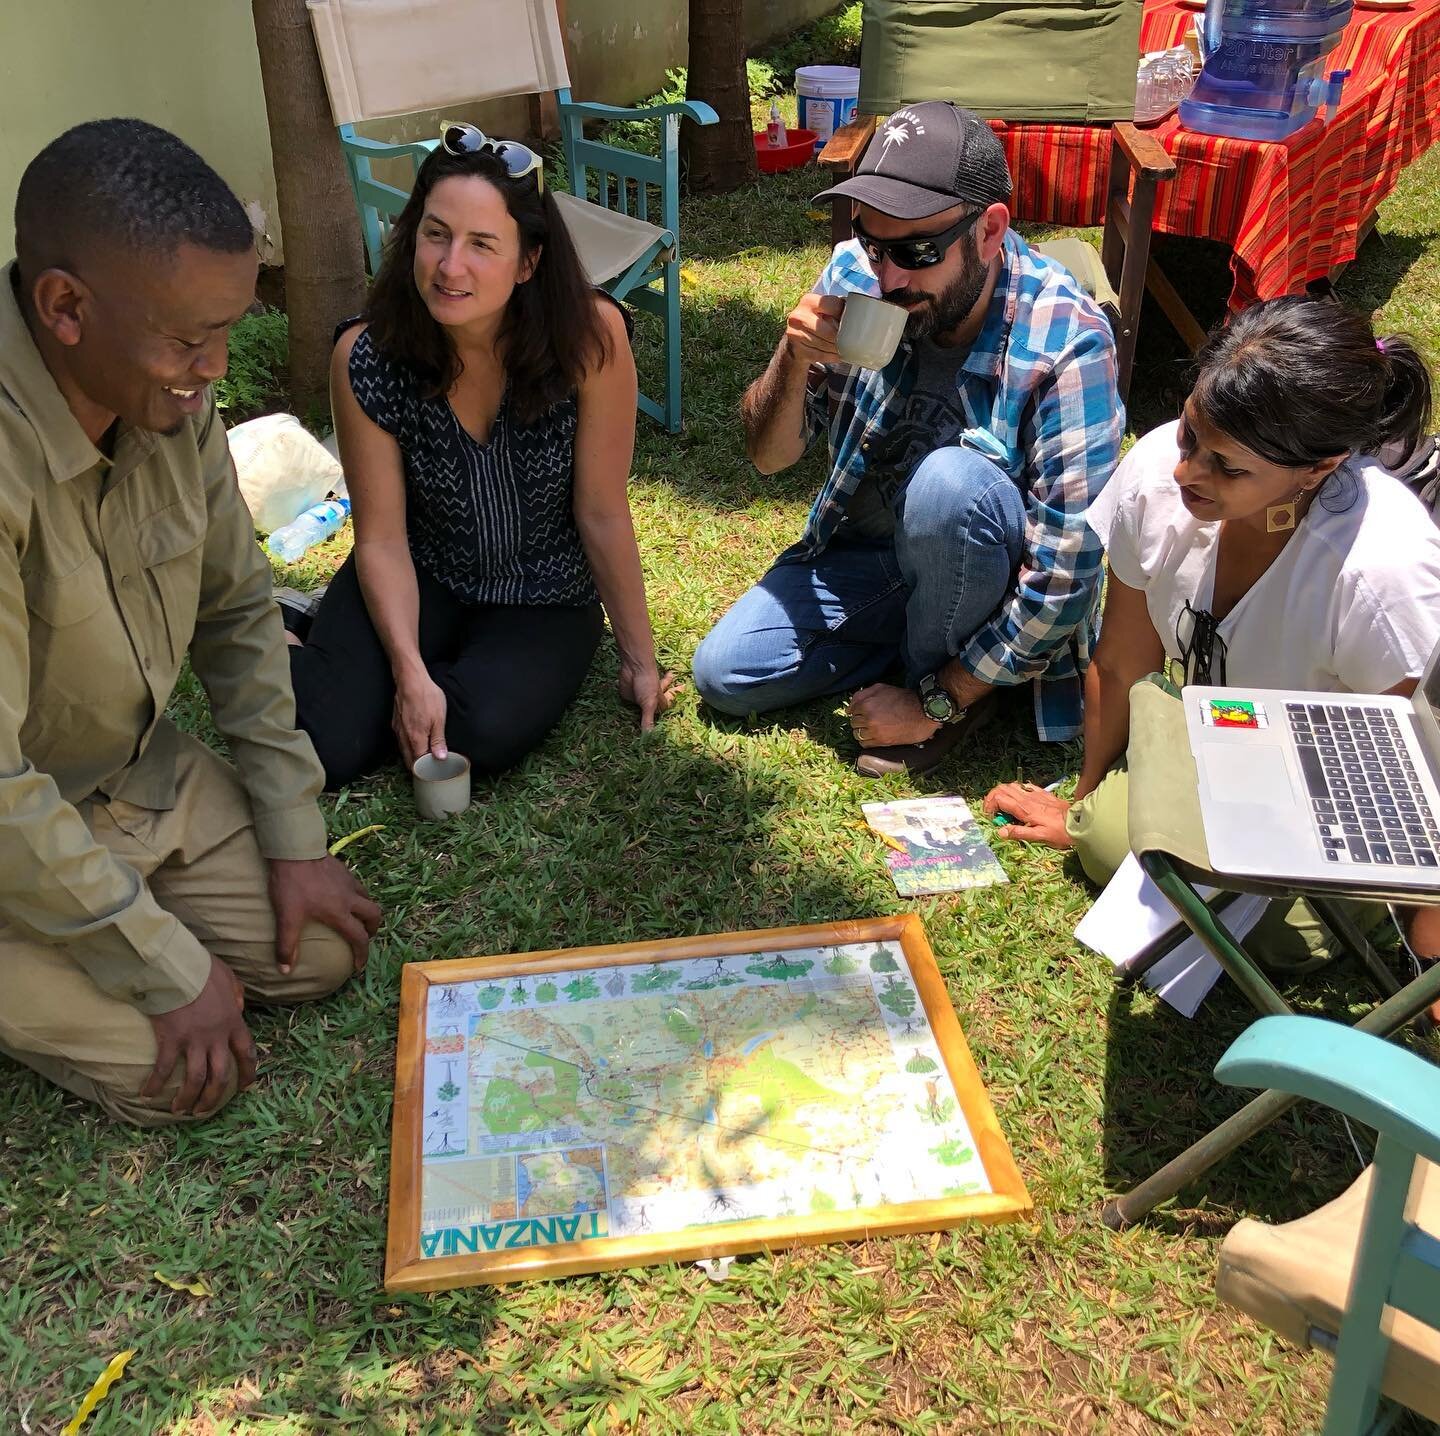 Bannikin team members Eduardo and Jillian are beyond ecstatic to be in Tanzania with our newest client @tanzania_journeys Tanzania Journeys, meeting the incredible guides and team to strategize new partnership development actions. Being abroad again 